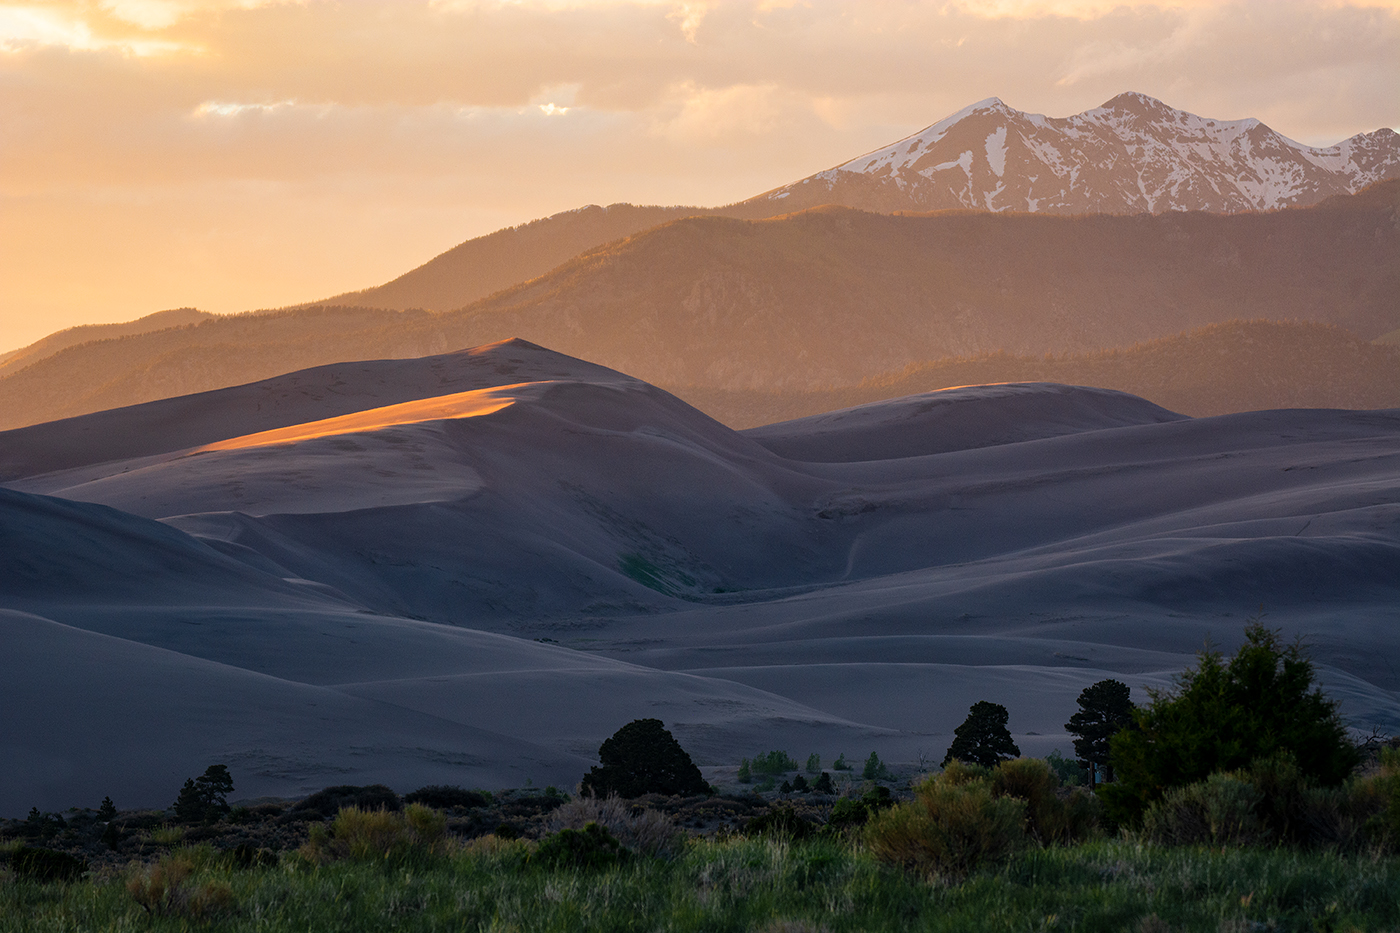 Grasslands, ponderosa pines, large dunes, and a snow-capped mountain